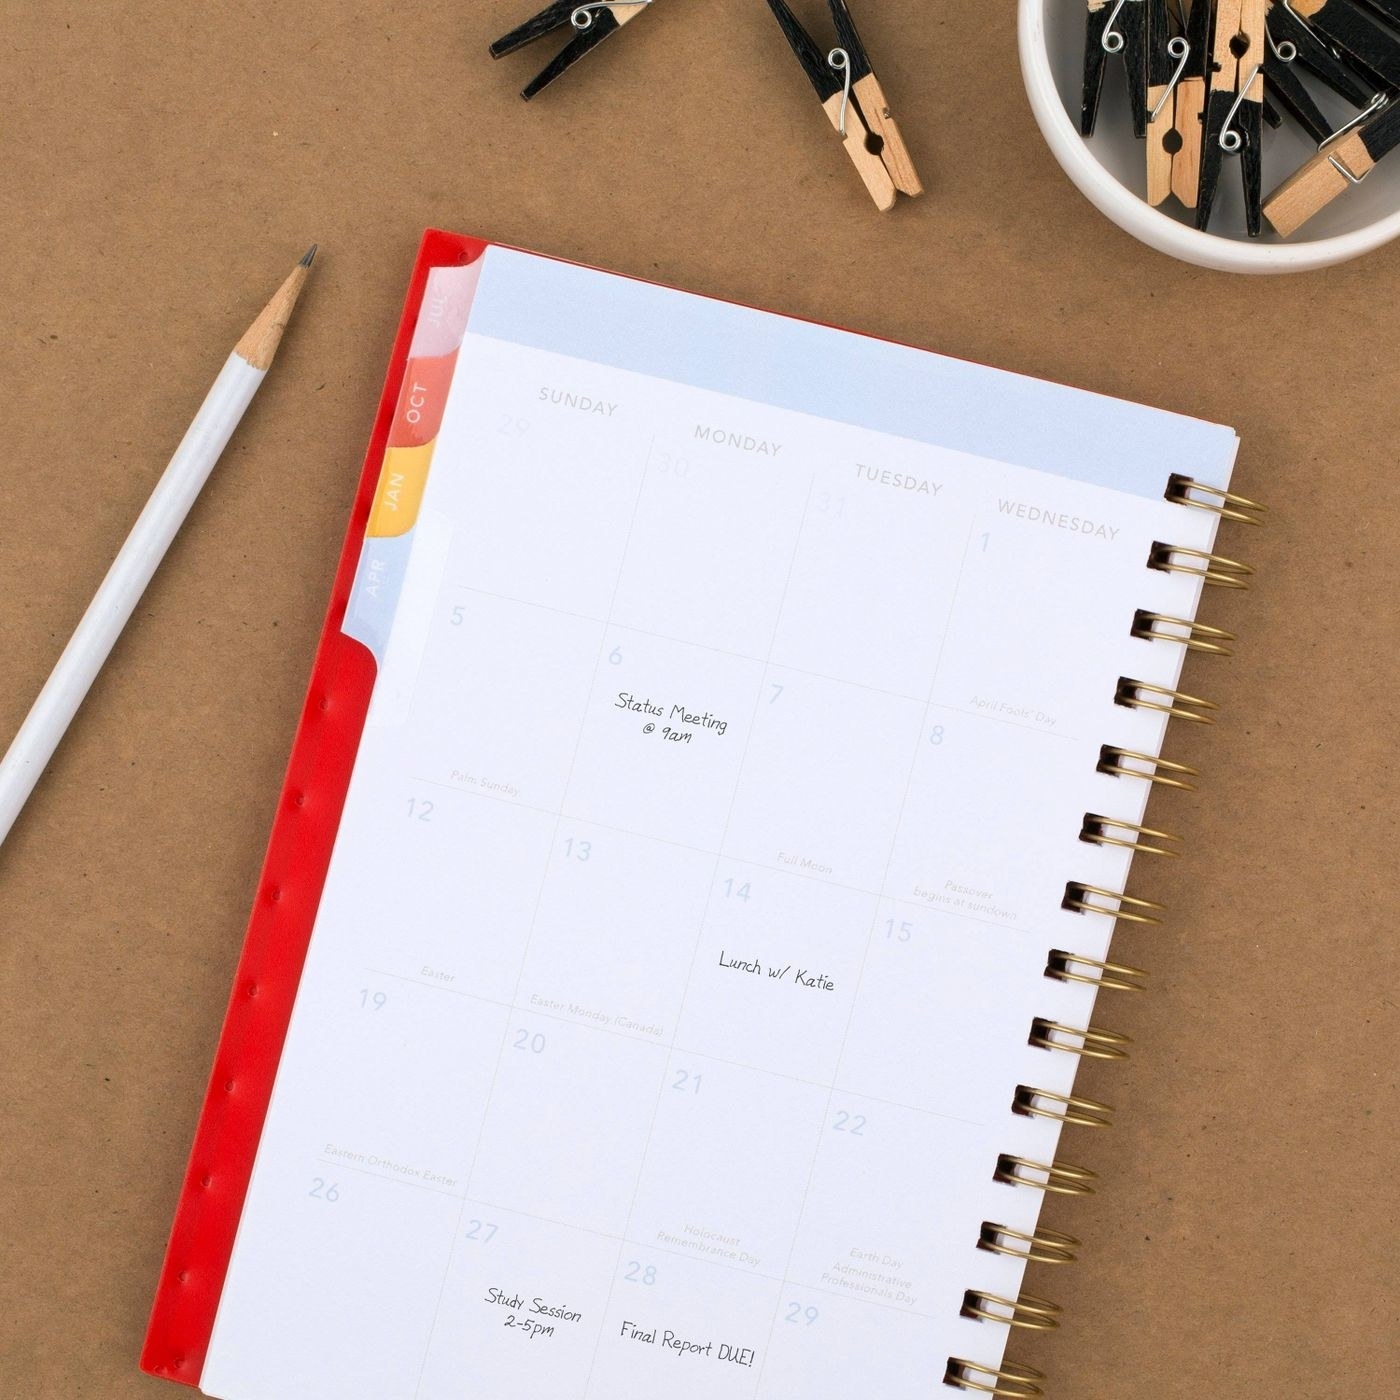 The academic planner